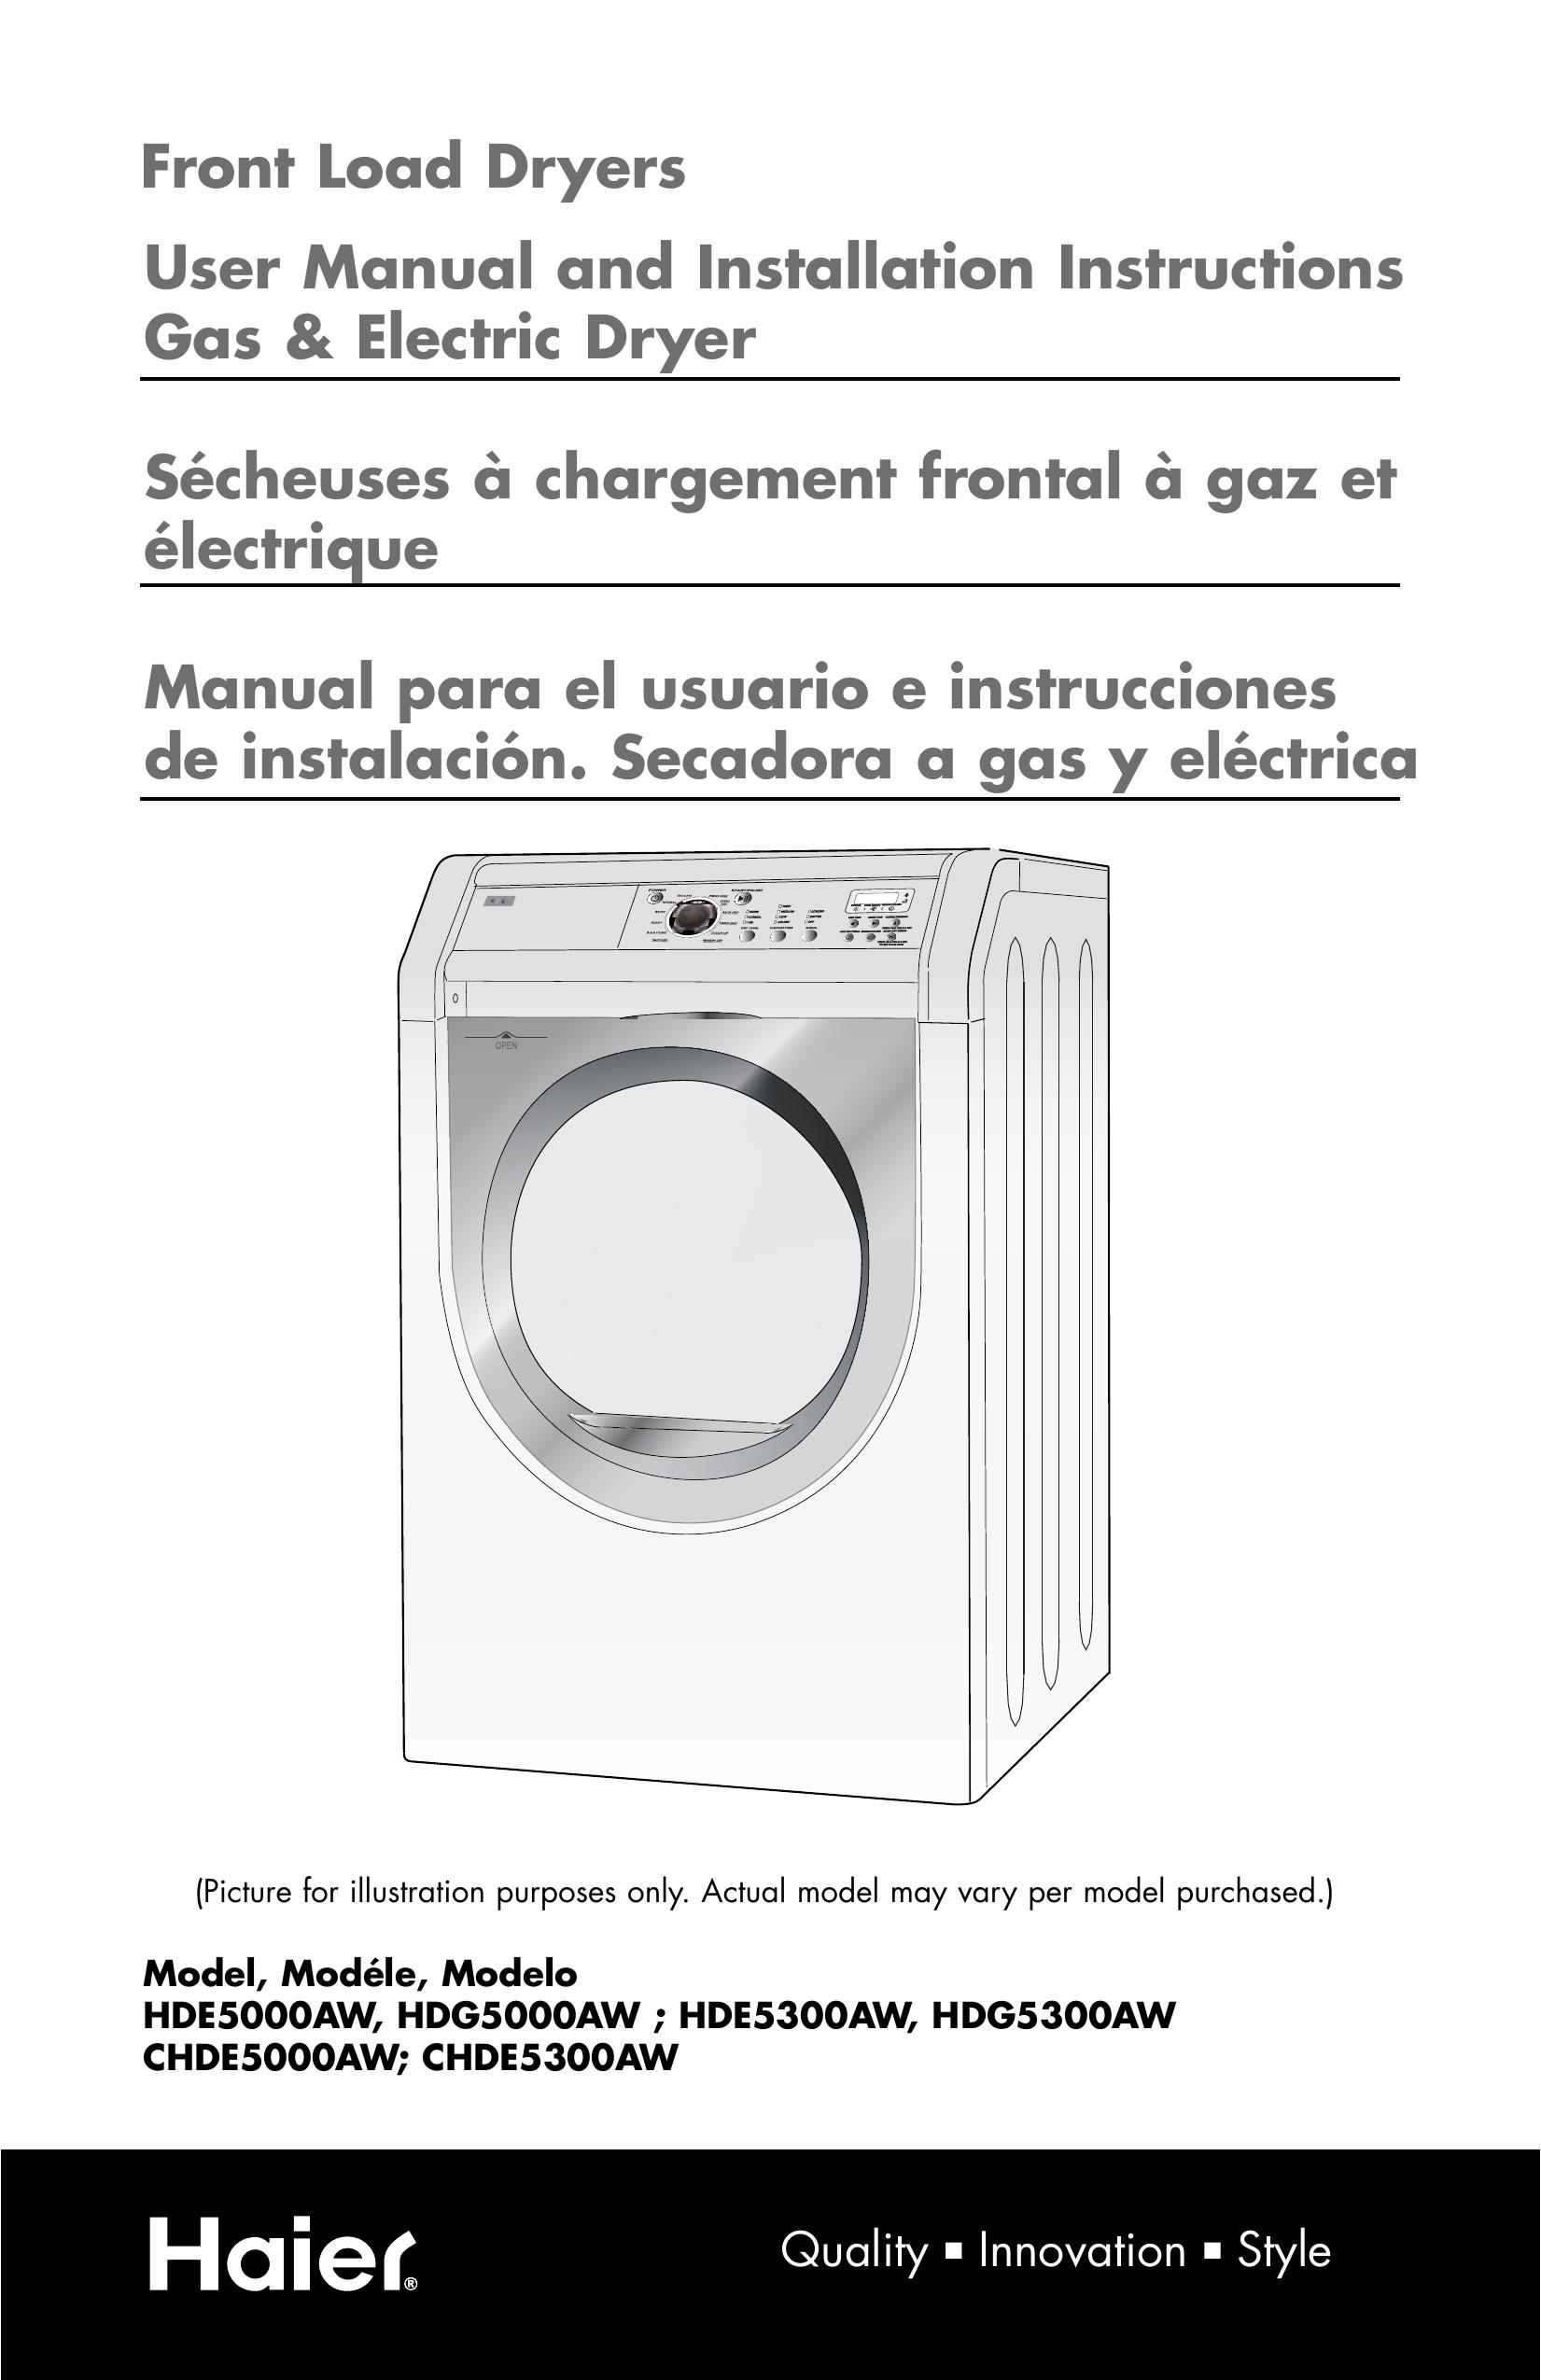 Haier CHDE5300AW Clothes Dryer User Manual